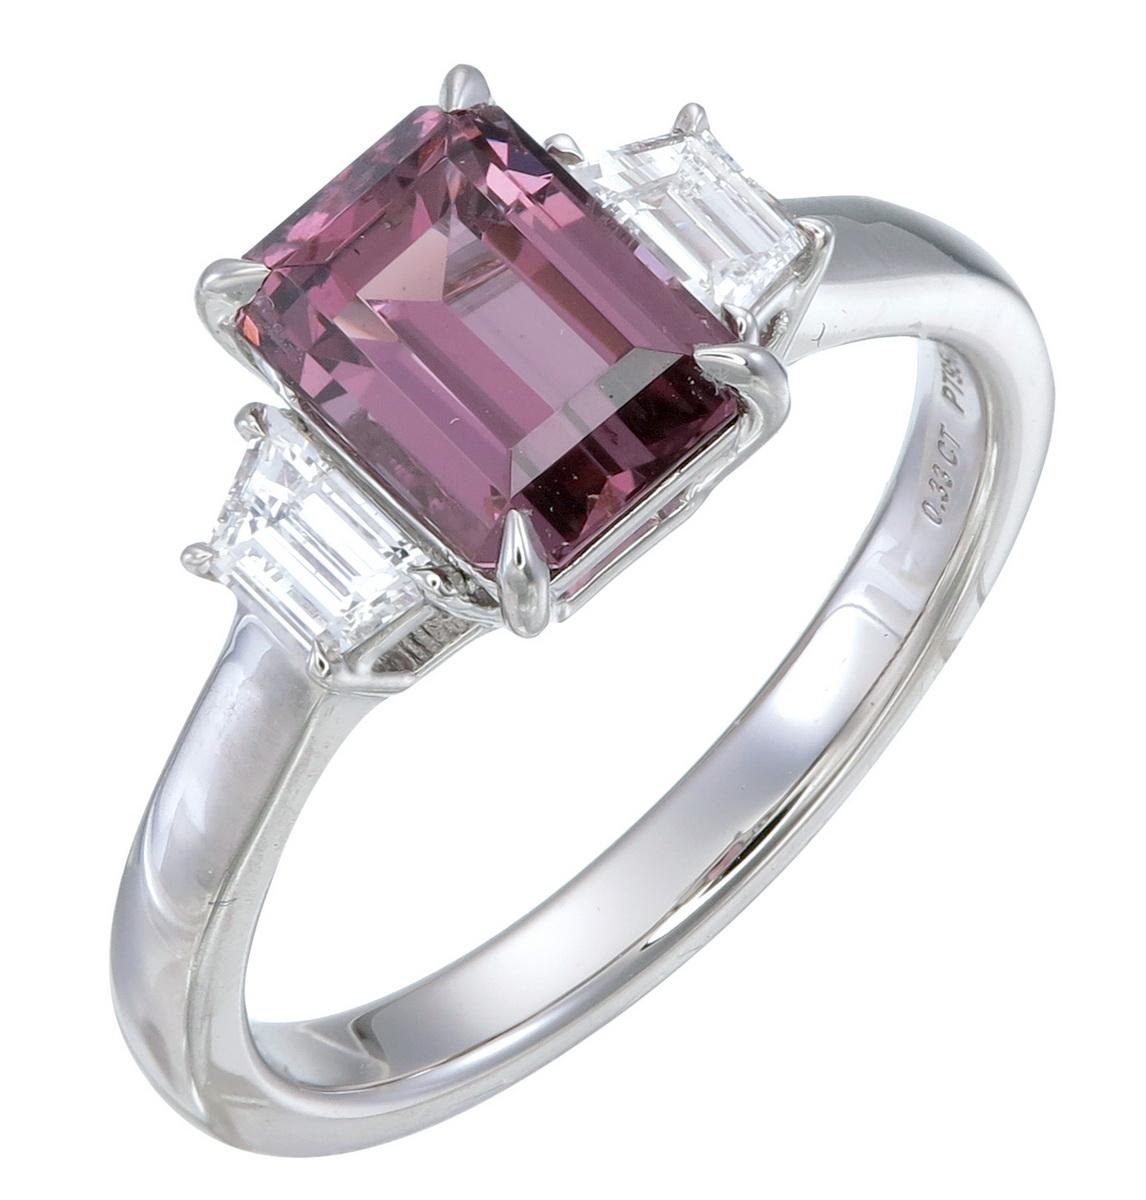 Women's Orloff of Denmark Platinum ring with Pink Spinel and Diamonds